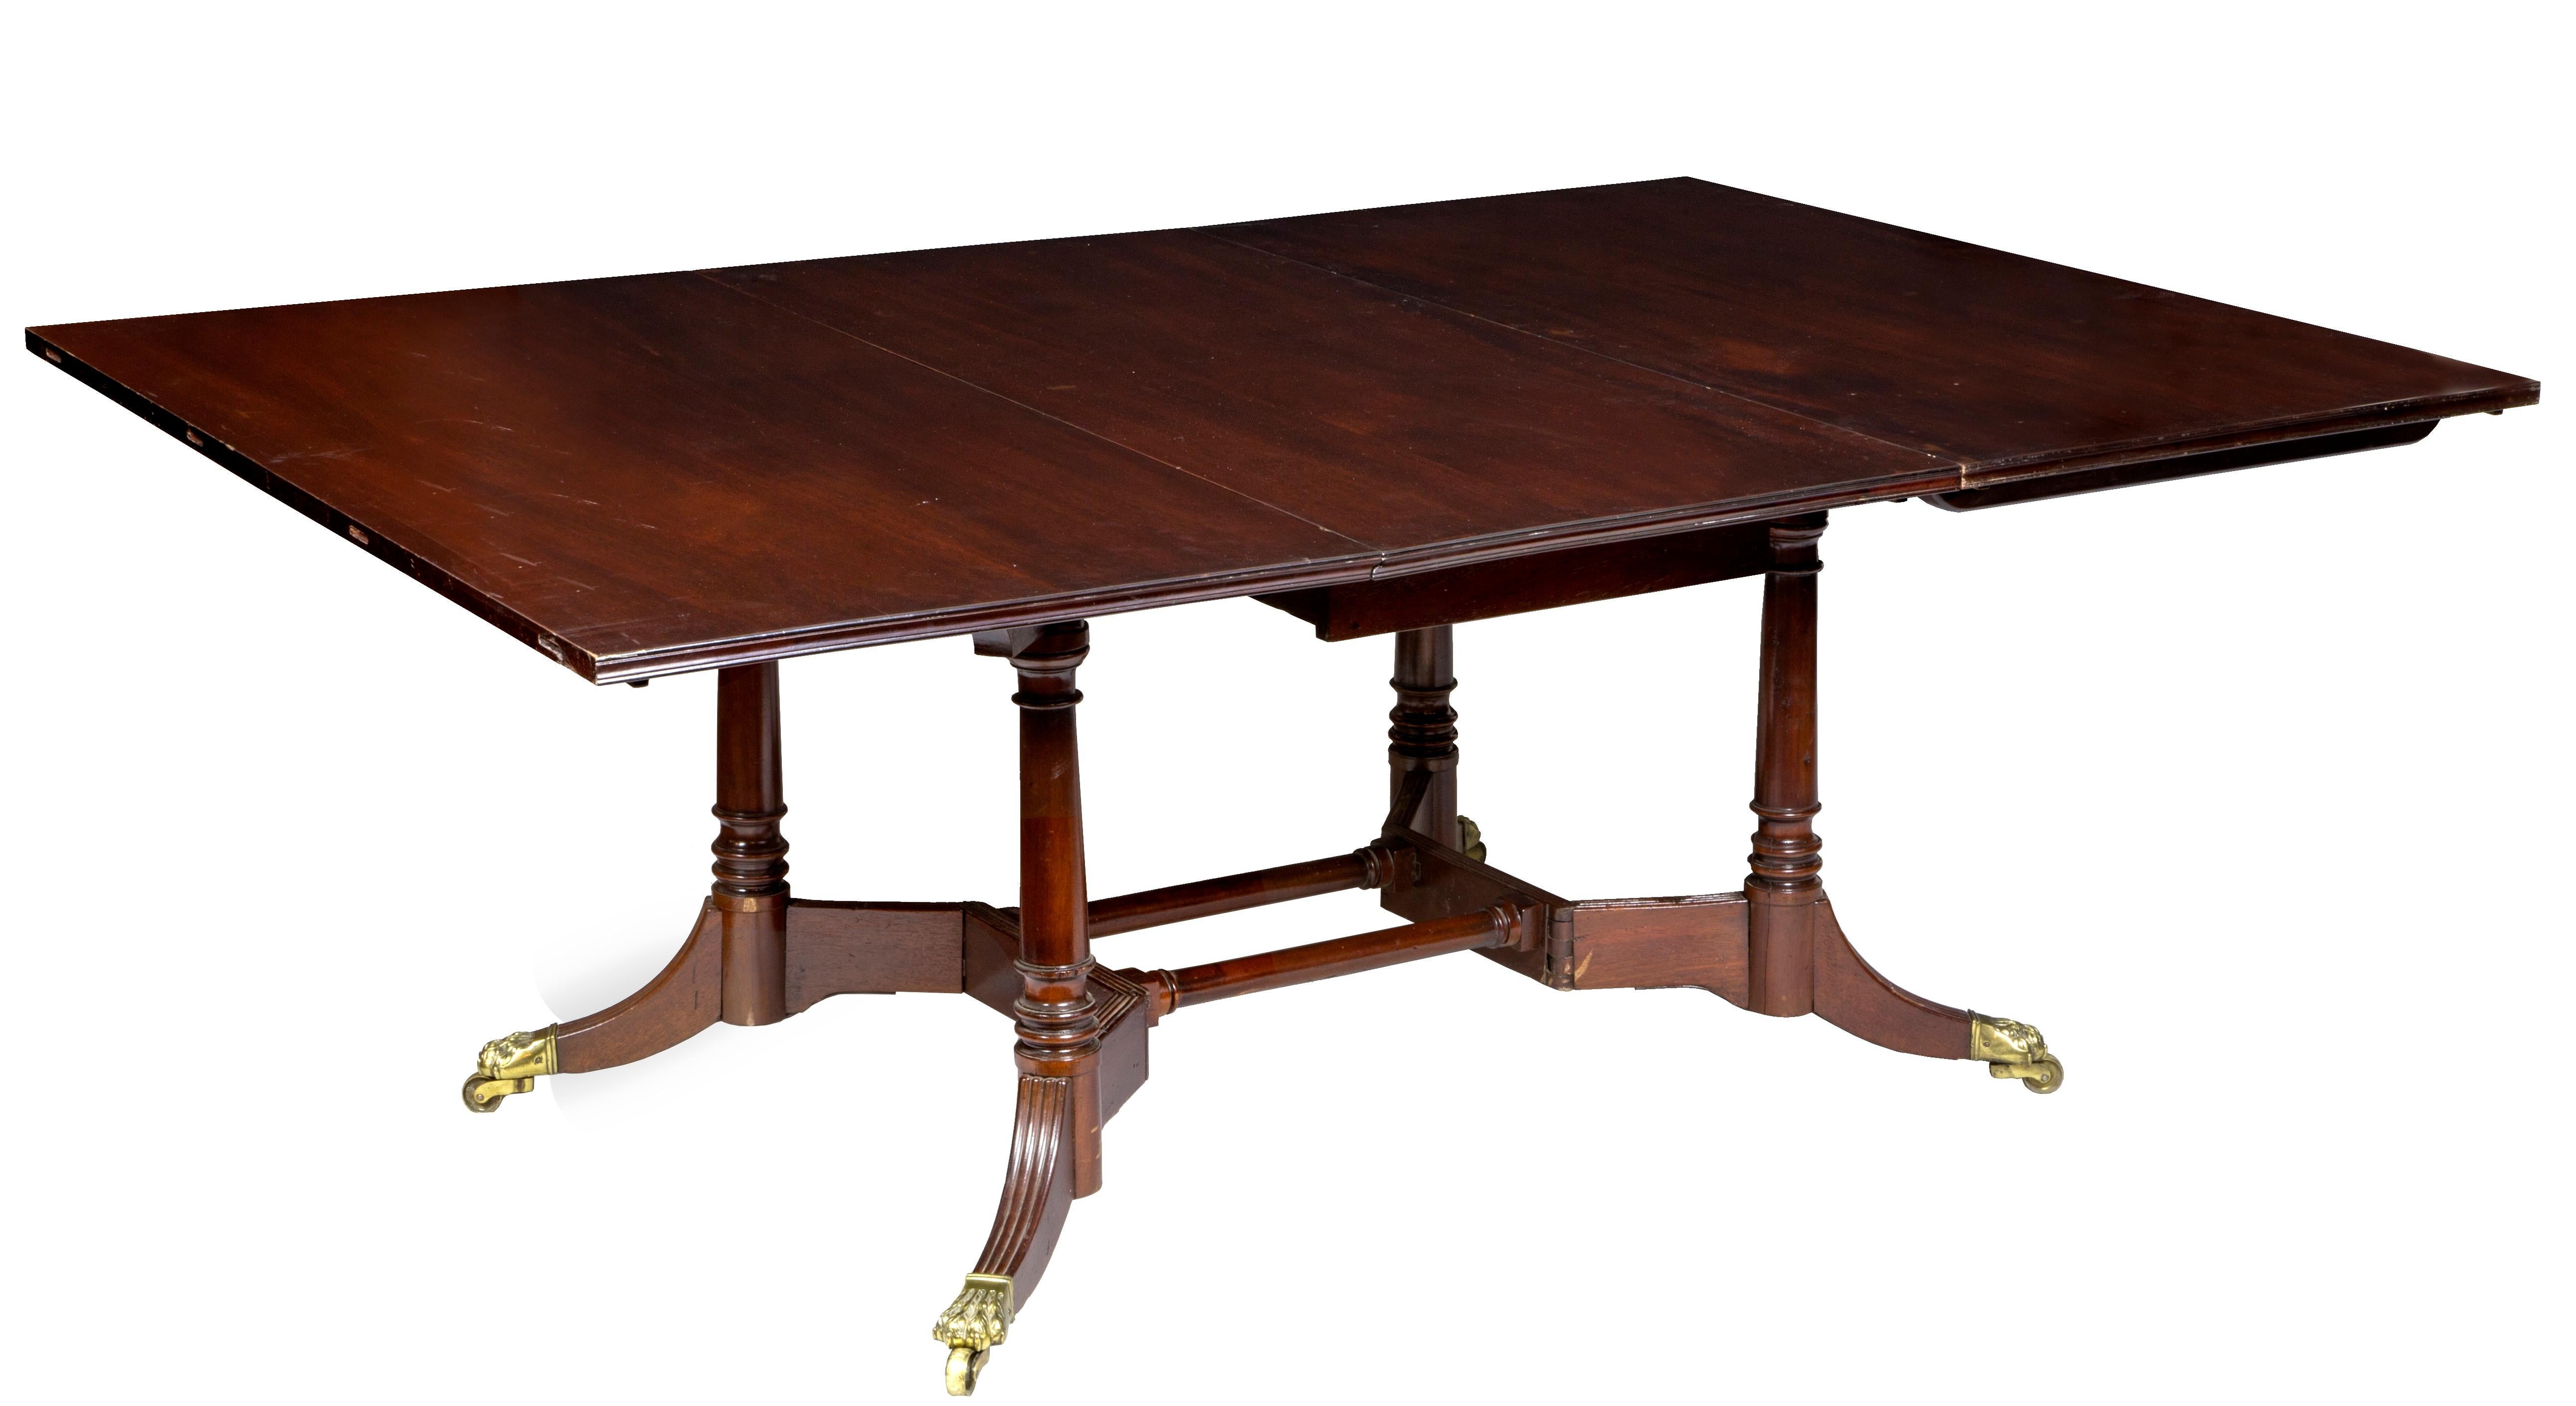 This is an outstanding grand banquet table of one of the most successful forms in being a two part model with all separating into two smaller tables that can serve as side tables or smaller tables Additionally, there are leaves that bring it to 145